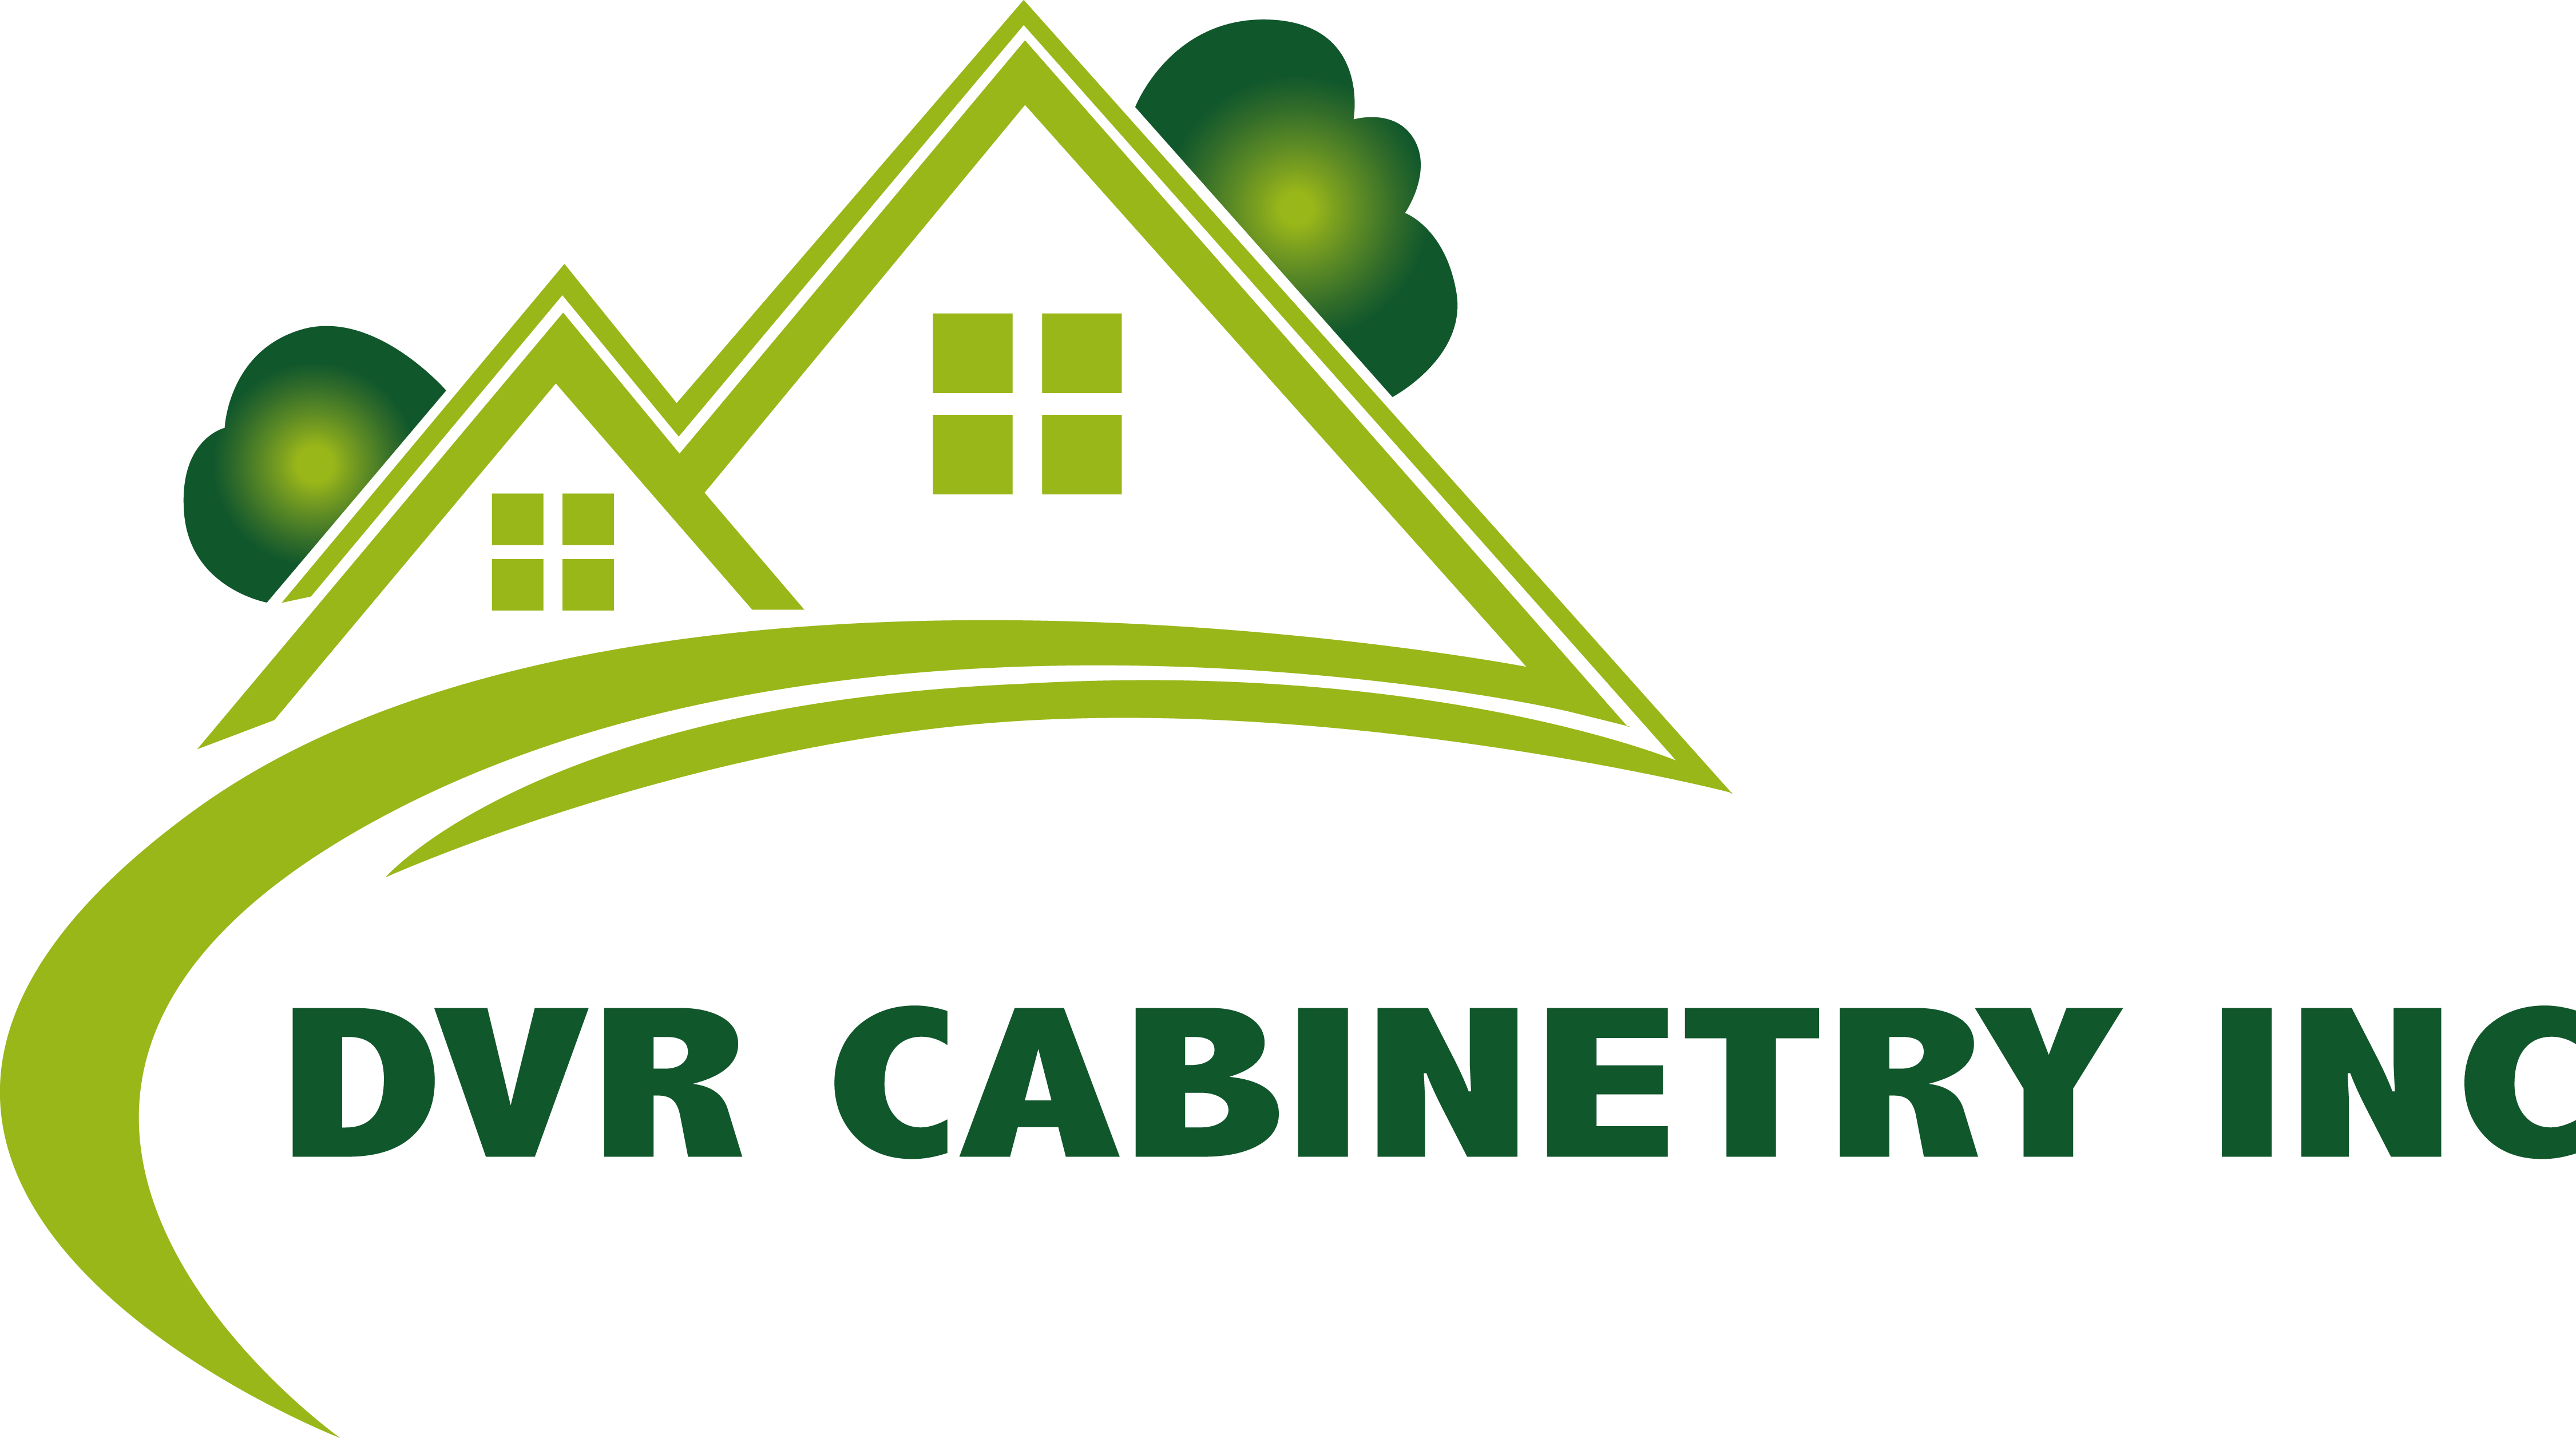 DVR Cabinetry